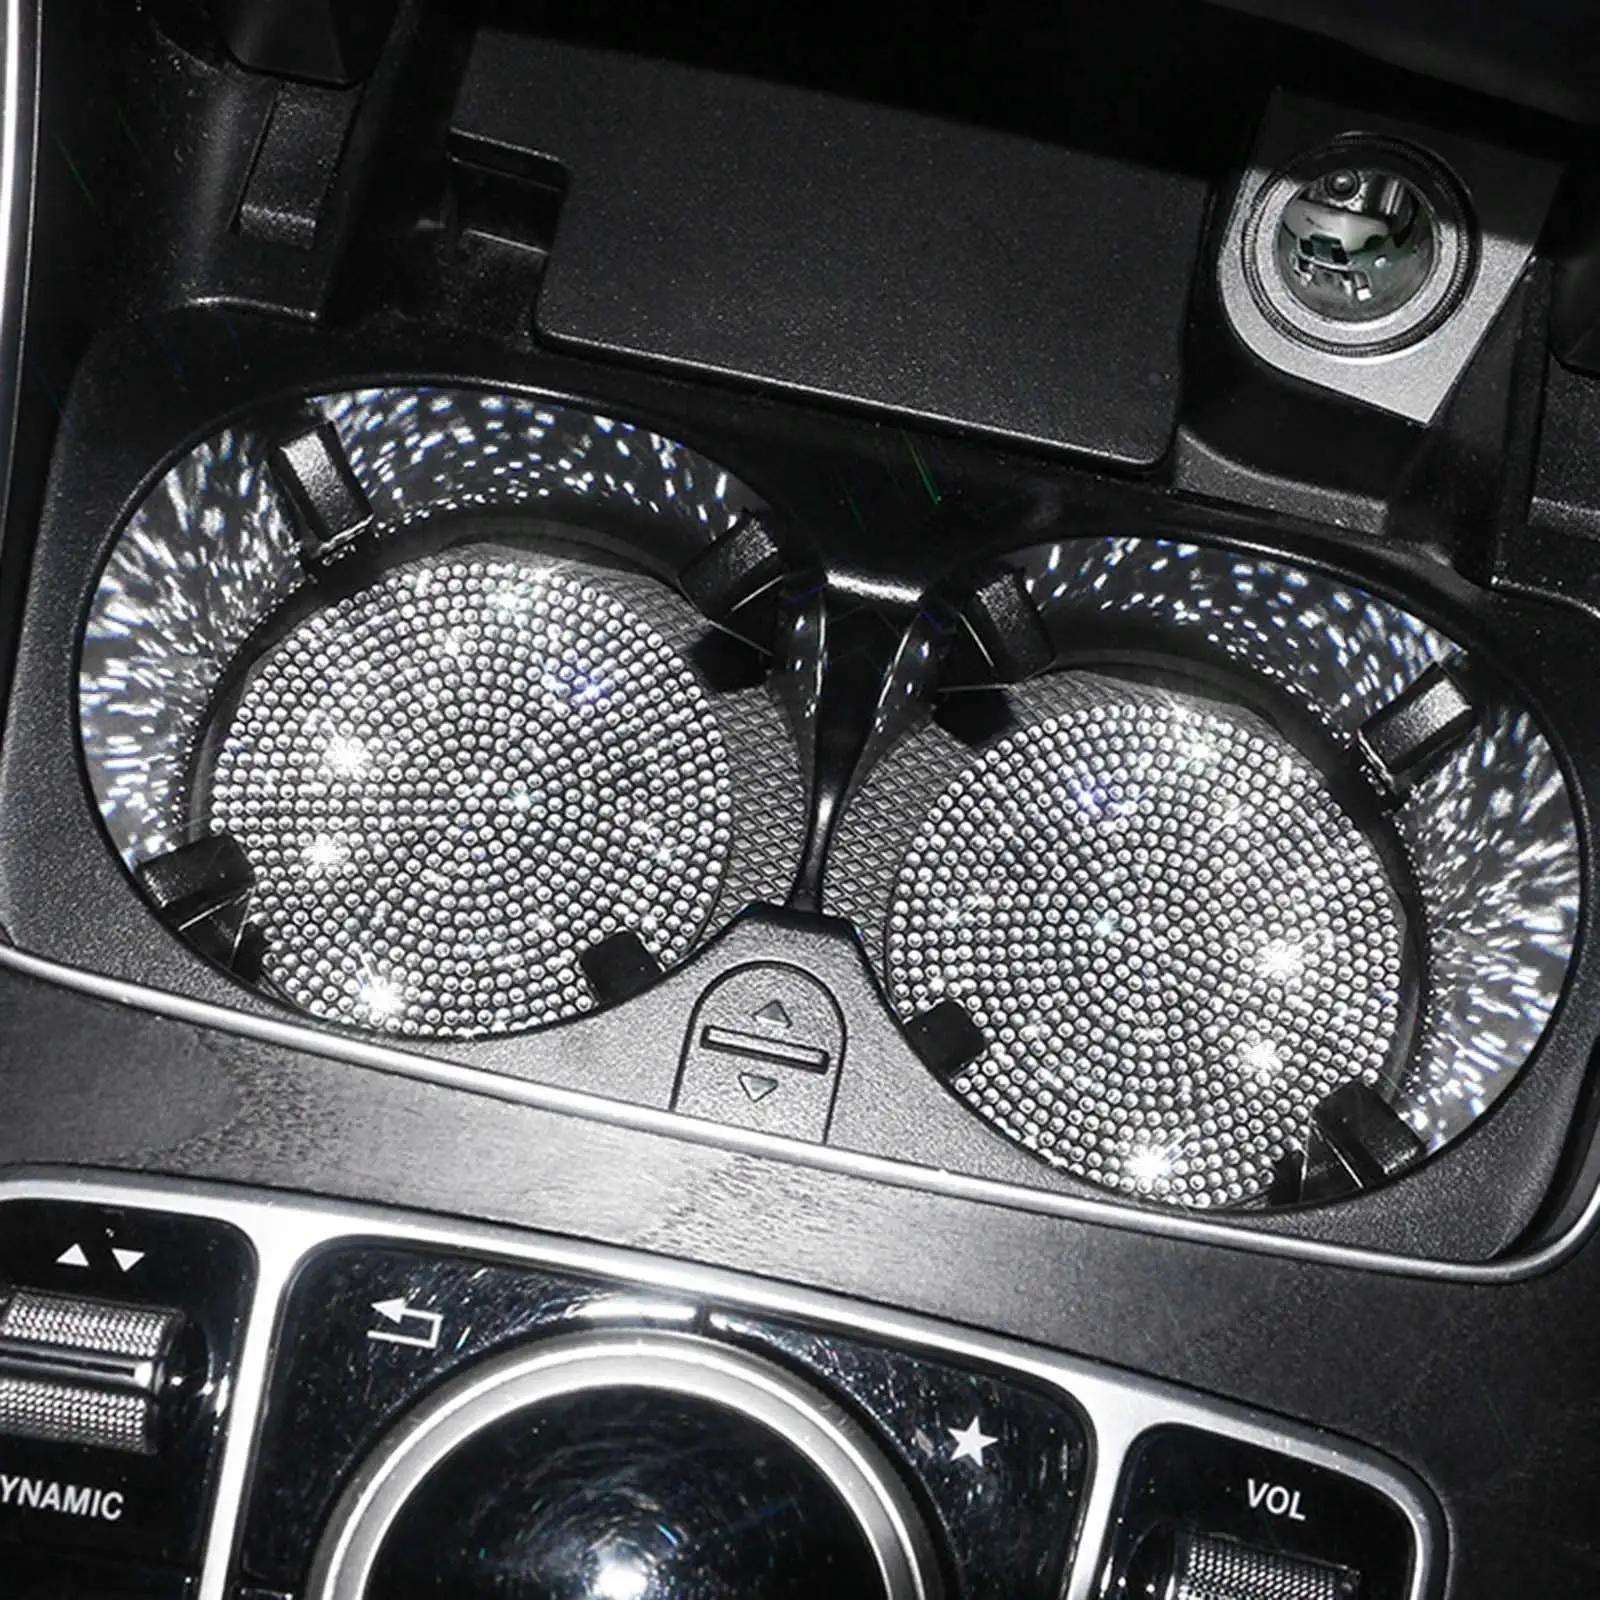 2 Pieces Car Cup Holder Coaster Full Rhinestone Cup Holder Insert Coaster Gift